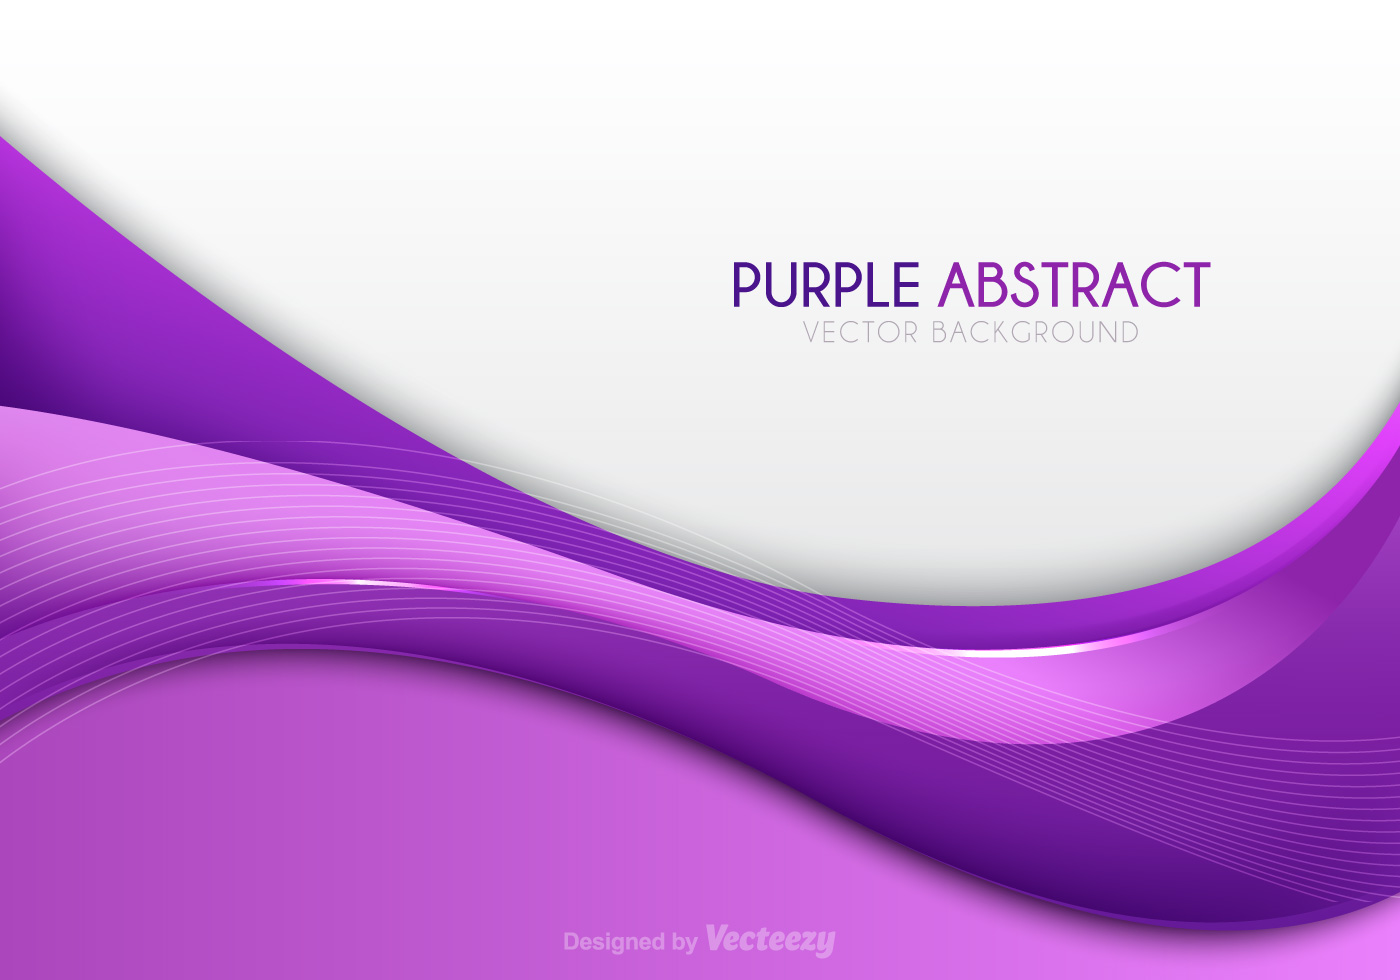 Free Purple Abstract Vector Background - Download Free Vector Art